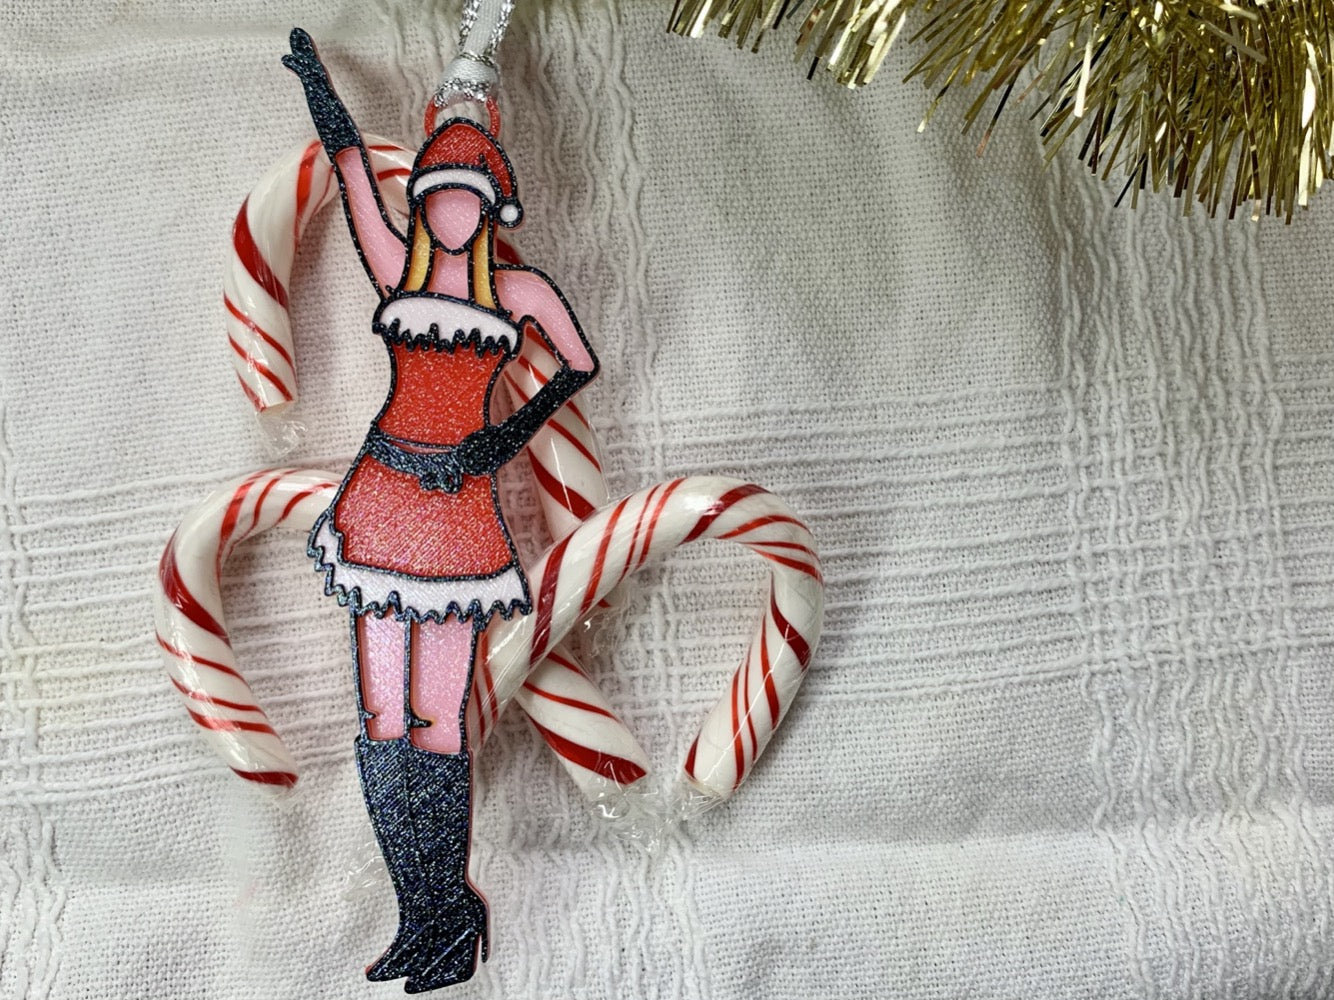 On a white fabric background there is a bit of gold garland and candy canes. Laying on top of these is a 3D printed ornament from R+D. The ornament is printed in a plant based filament. It is shaped like Regina George from the movie Mean Girls. She is striking the iconic pose at the beginning of performing Jingle Bell Rock, wearing black gloves and boots and a red outfit with white trim. The entire ornament is covered in glitter to shimmer and shine in the light. 